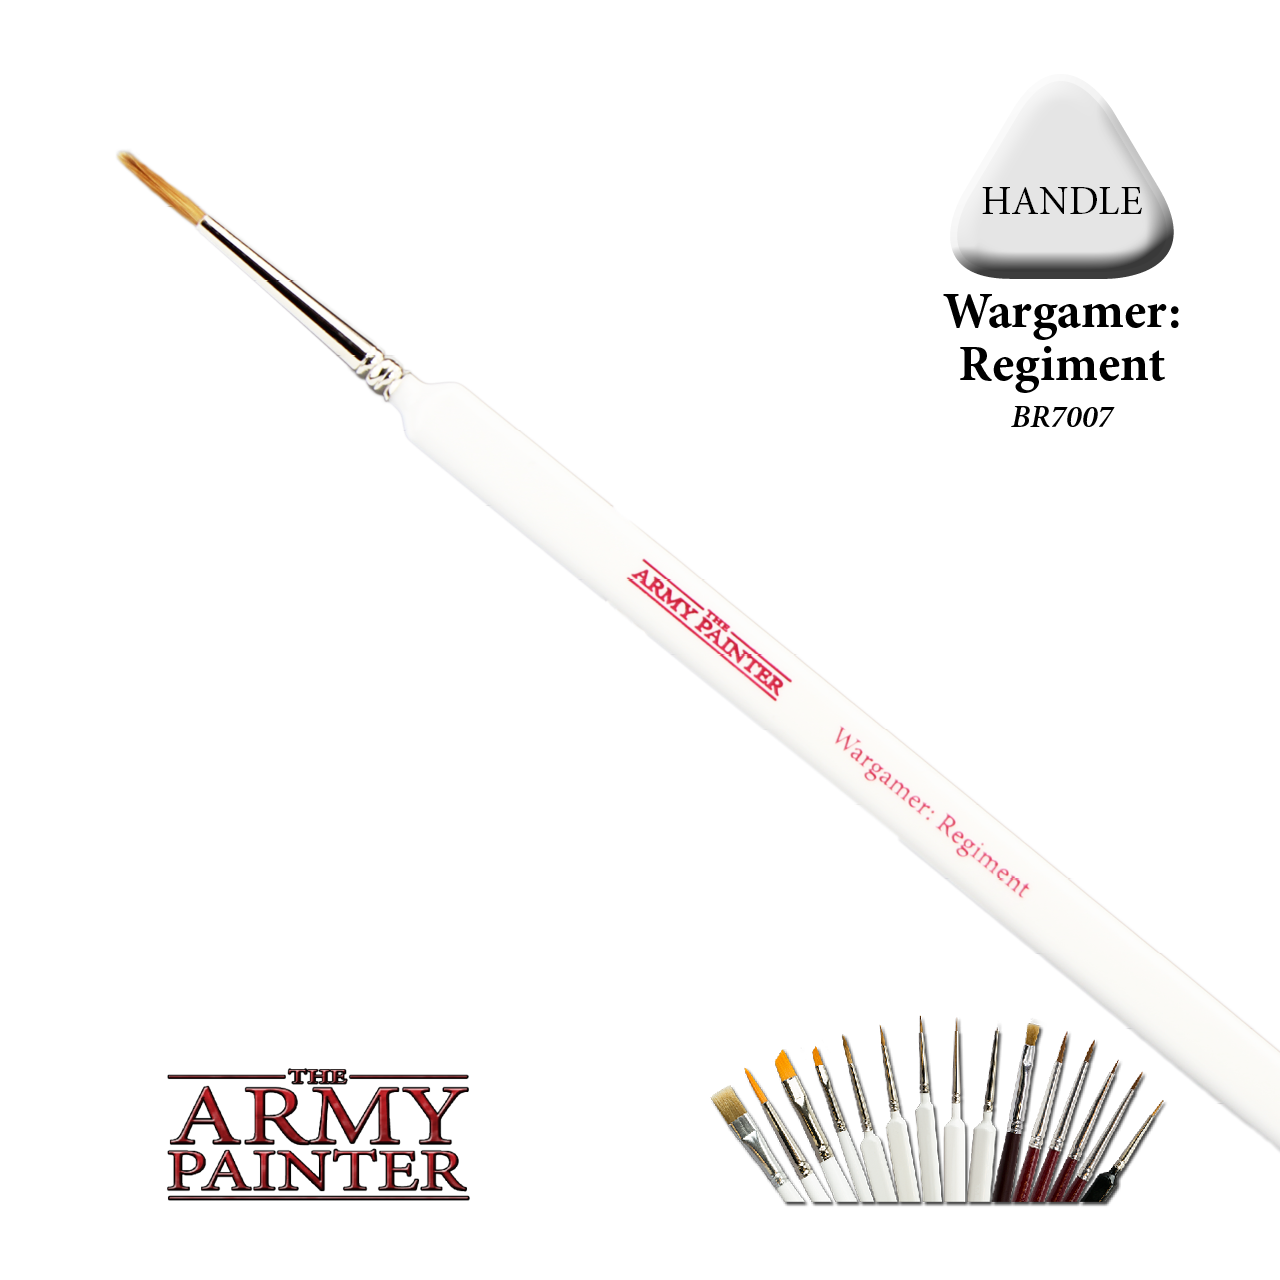 The ARMY PAINTER: Brushes - Wargamer: Regiment | Tacoma Games